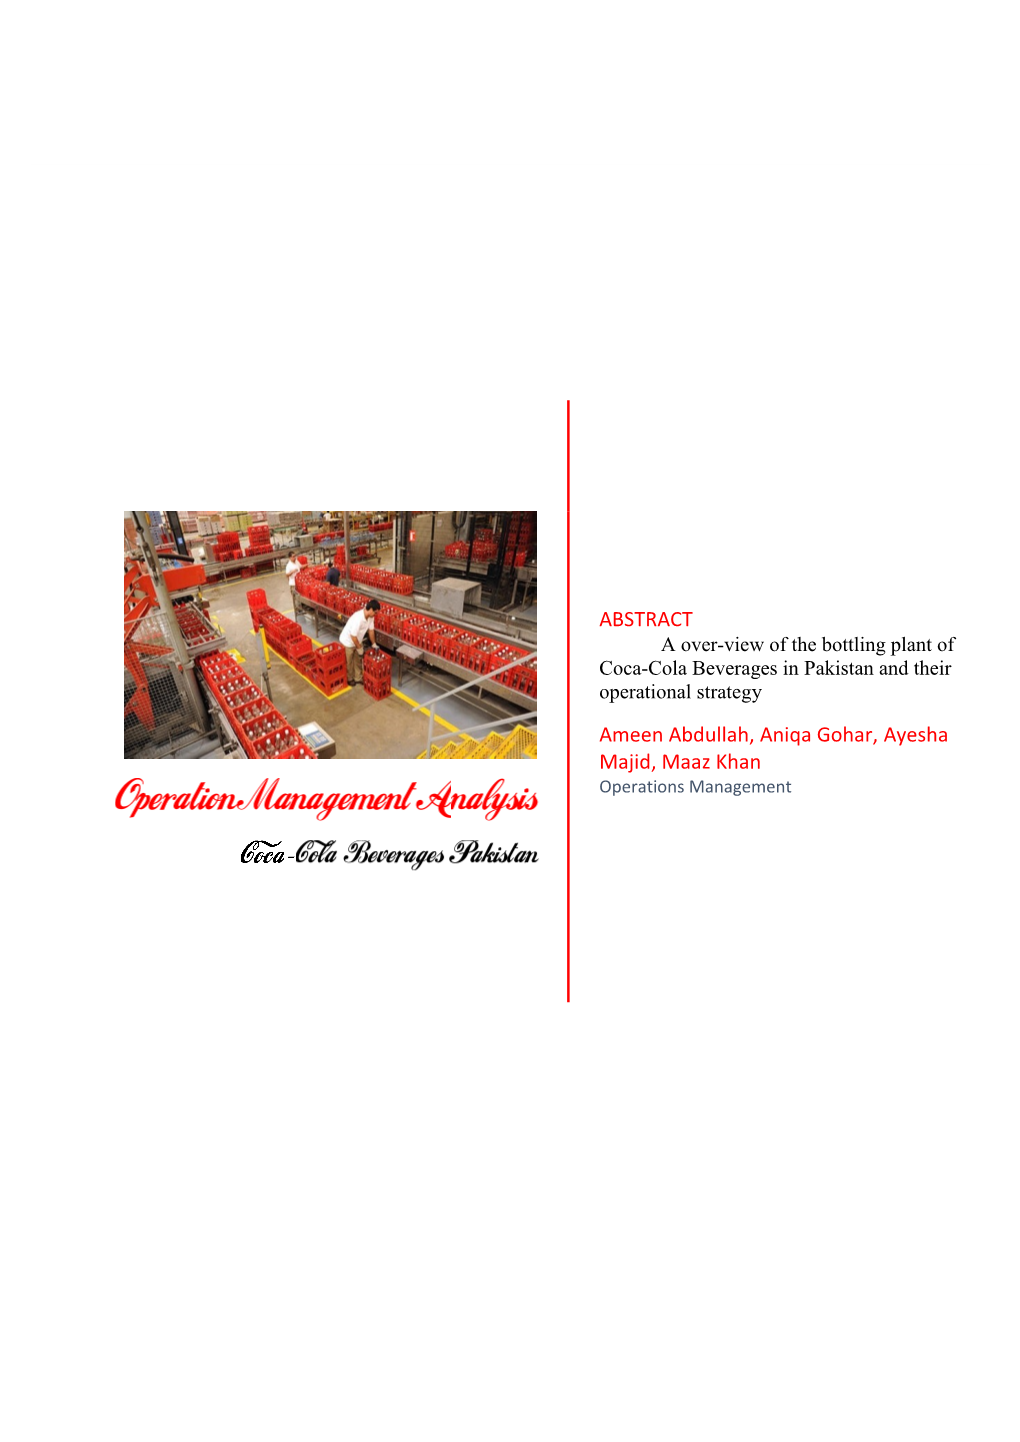 A Over-View of the Bottling Plant of Coca-Cola Beverages in Pakistan and Their Operational Strategy